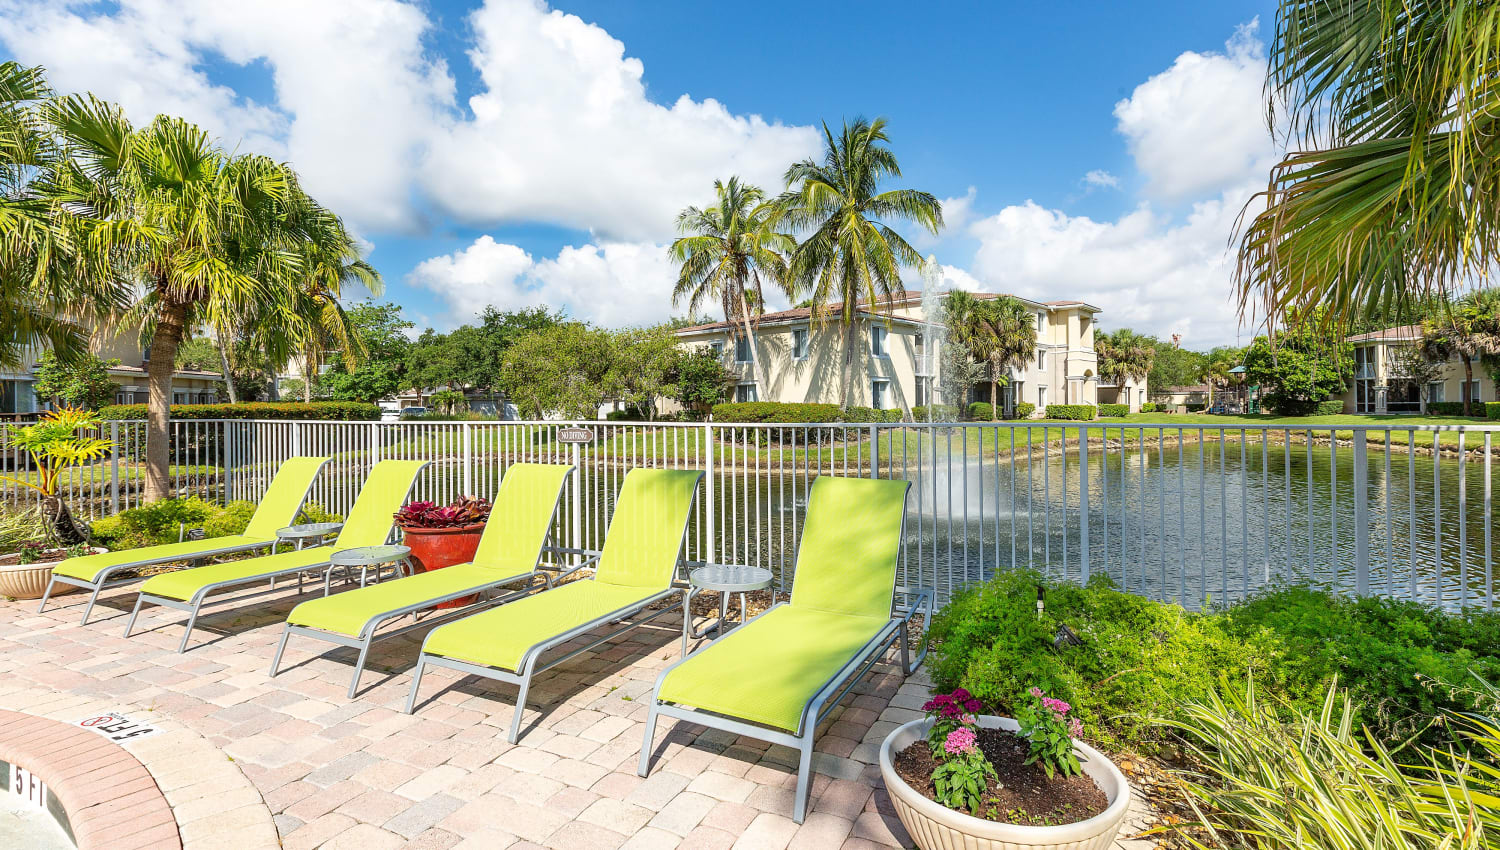 Lakeview area at Ibis Reserve Apartments in West Palm Beach, Florida